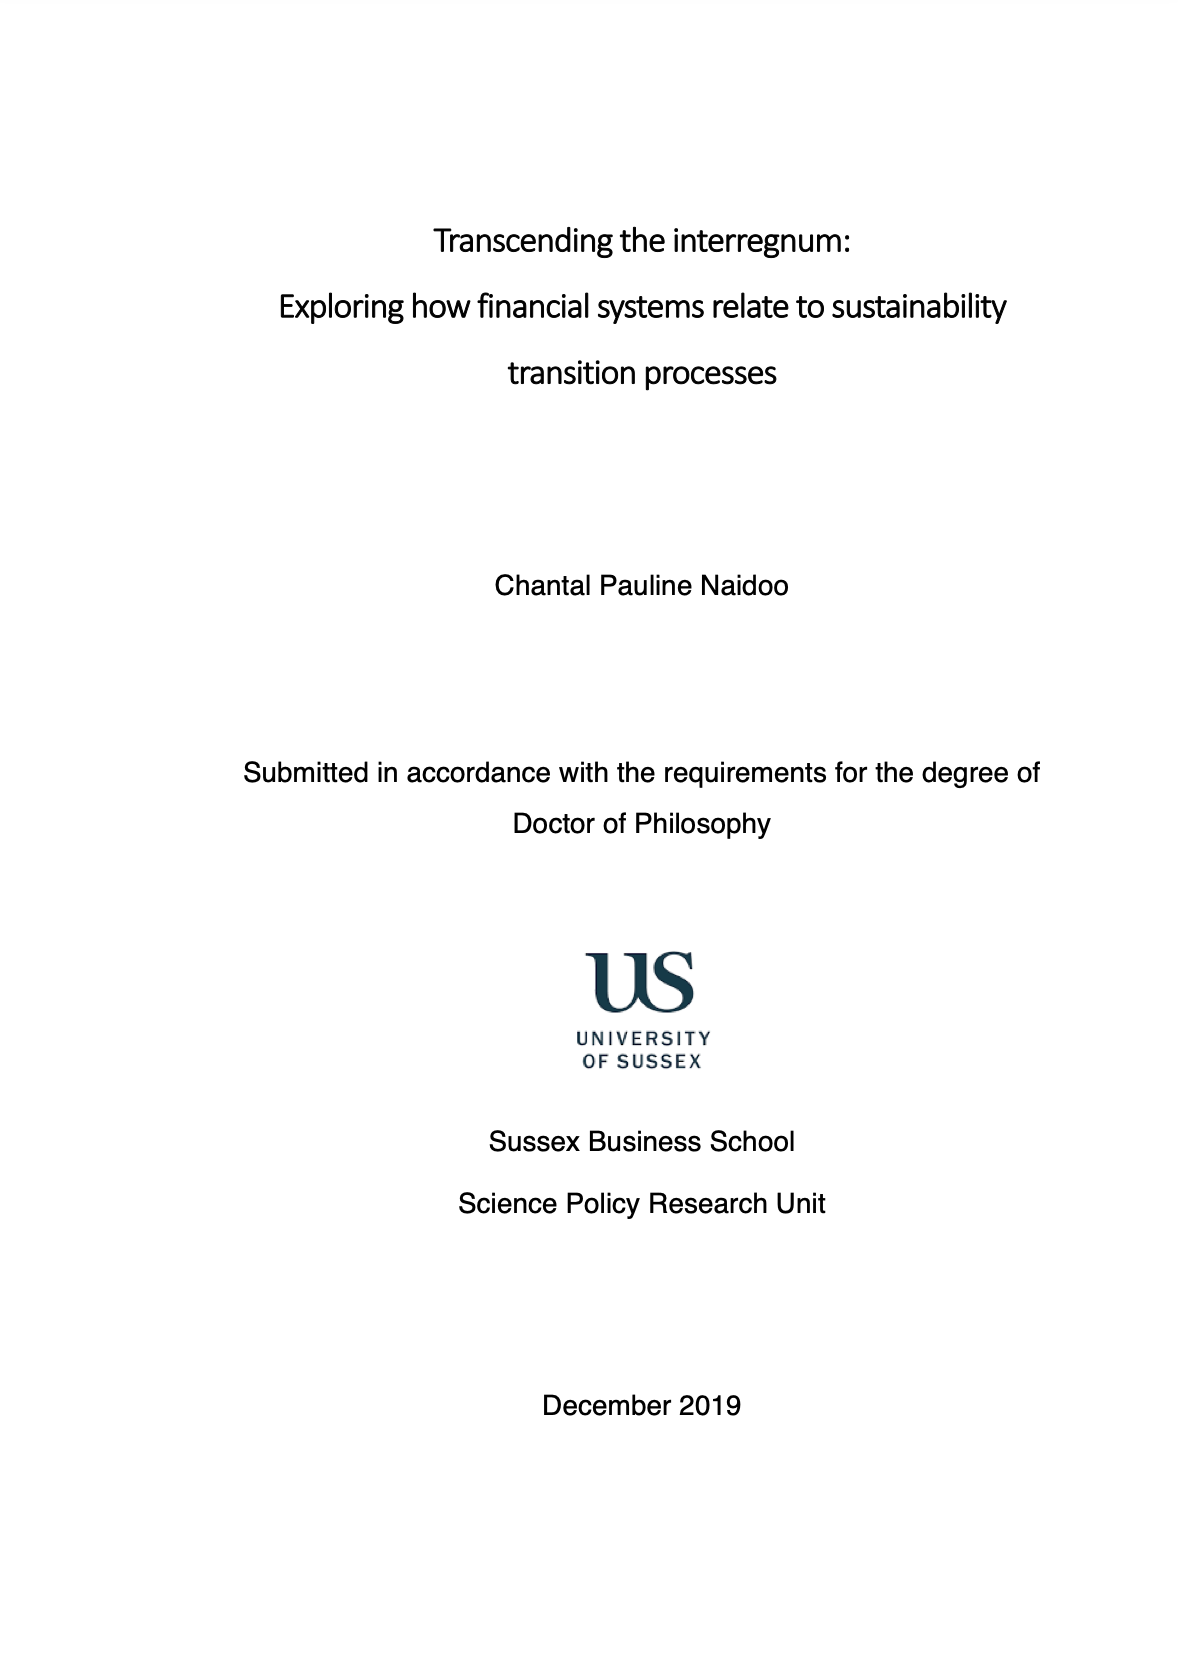 Transcending the interregnum: Exploring how financial systems related to sustainability transition processes